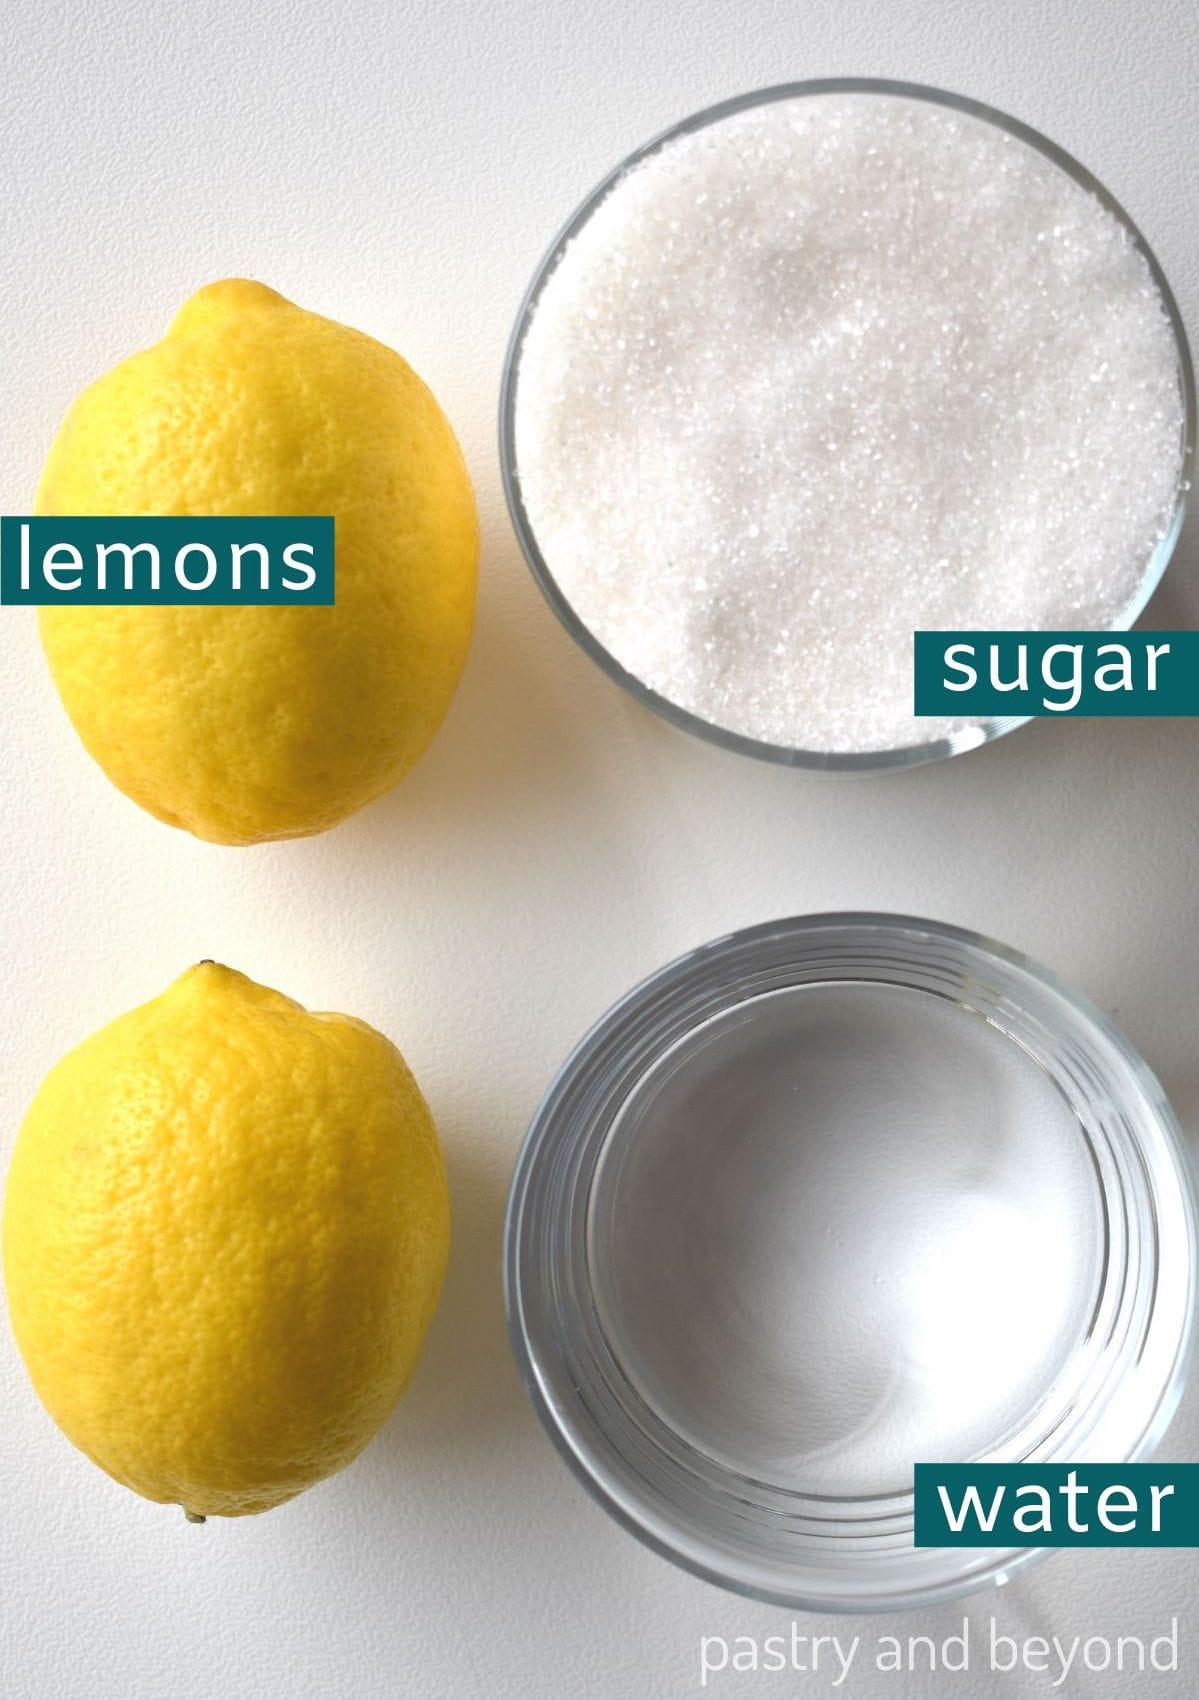 Ingredients to make candied lemon slices.